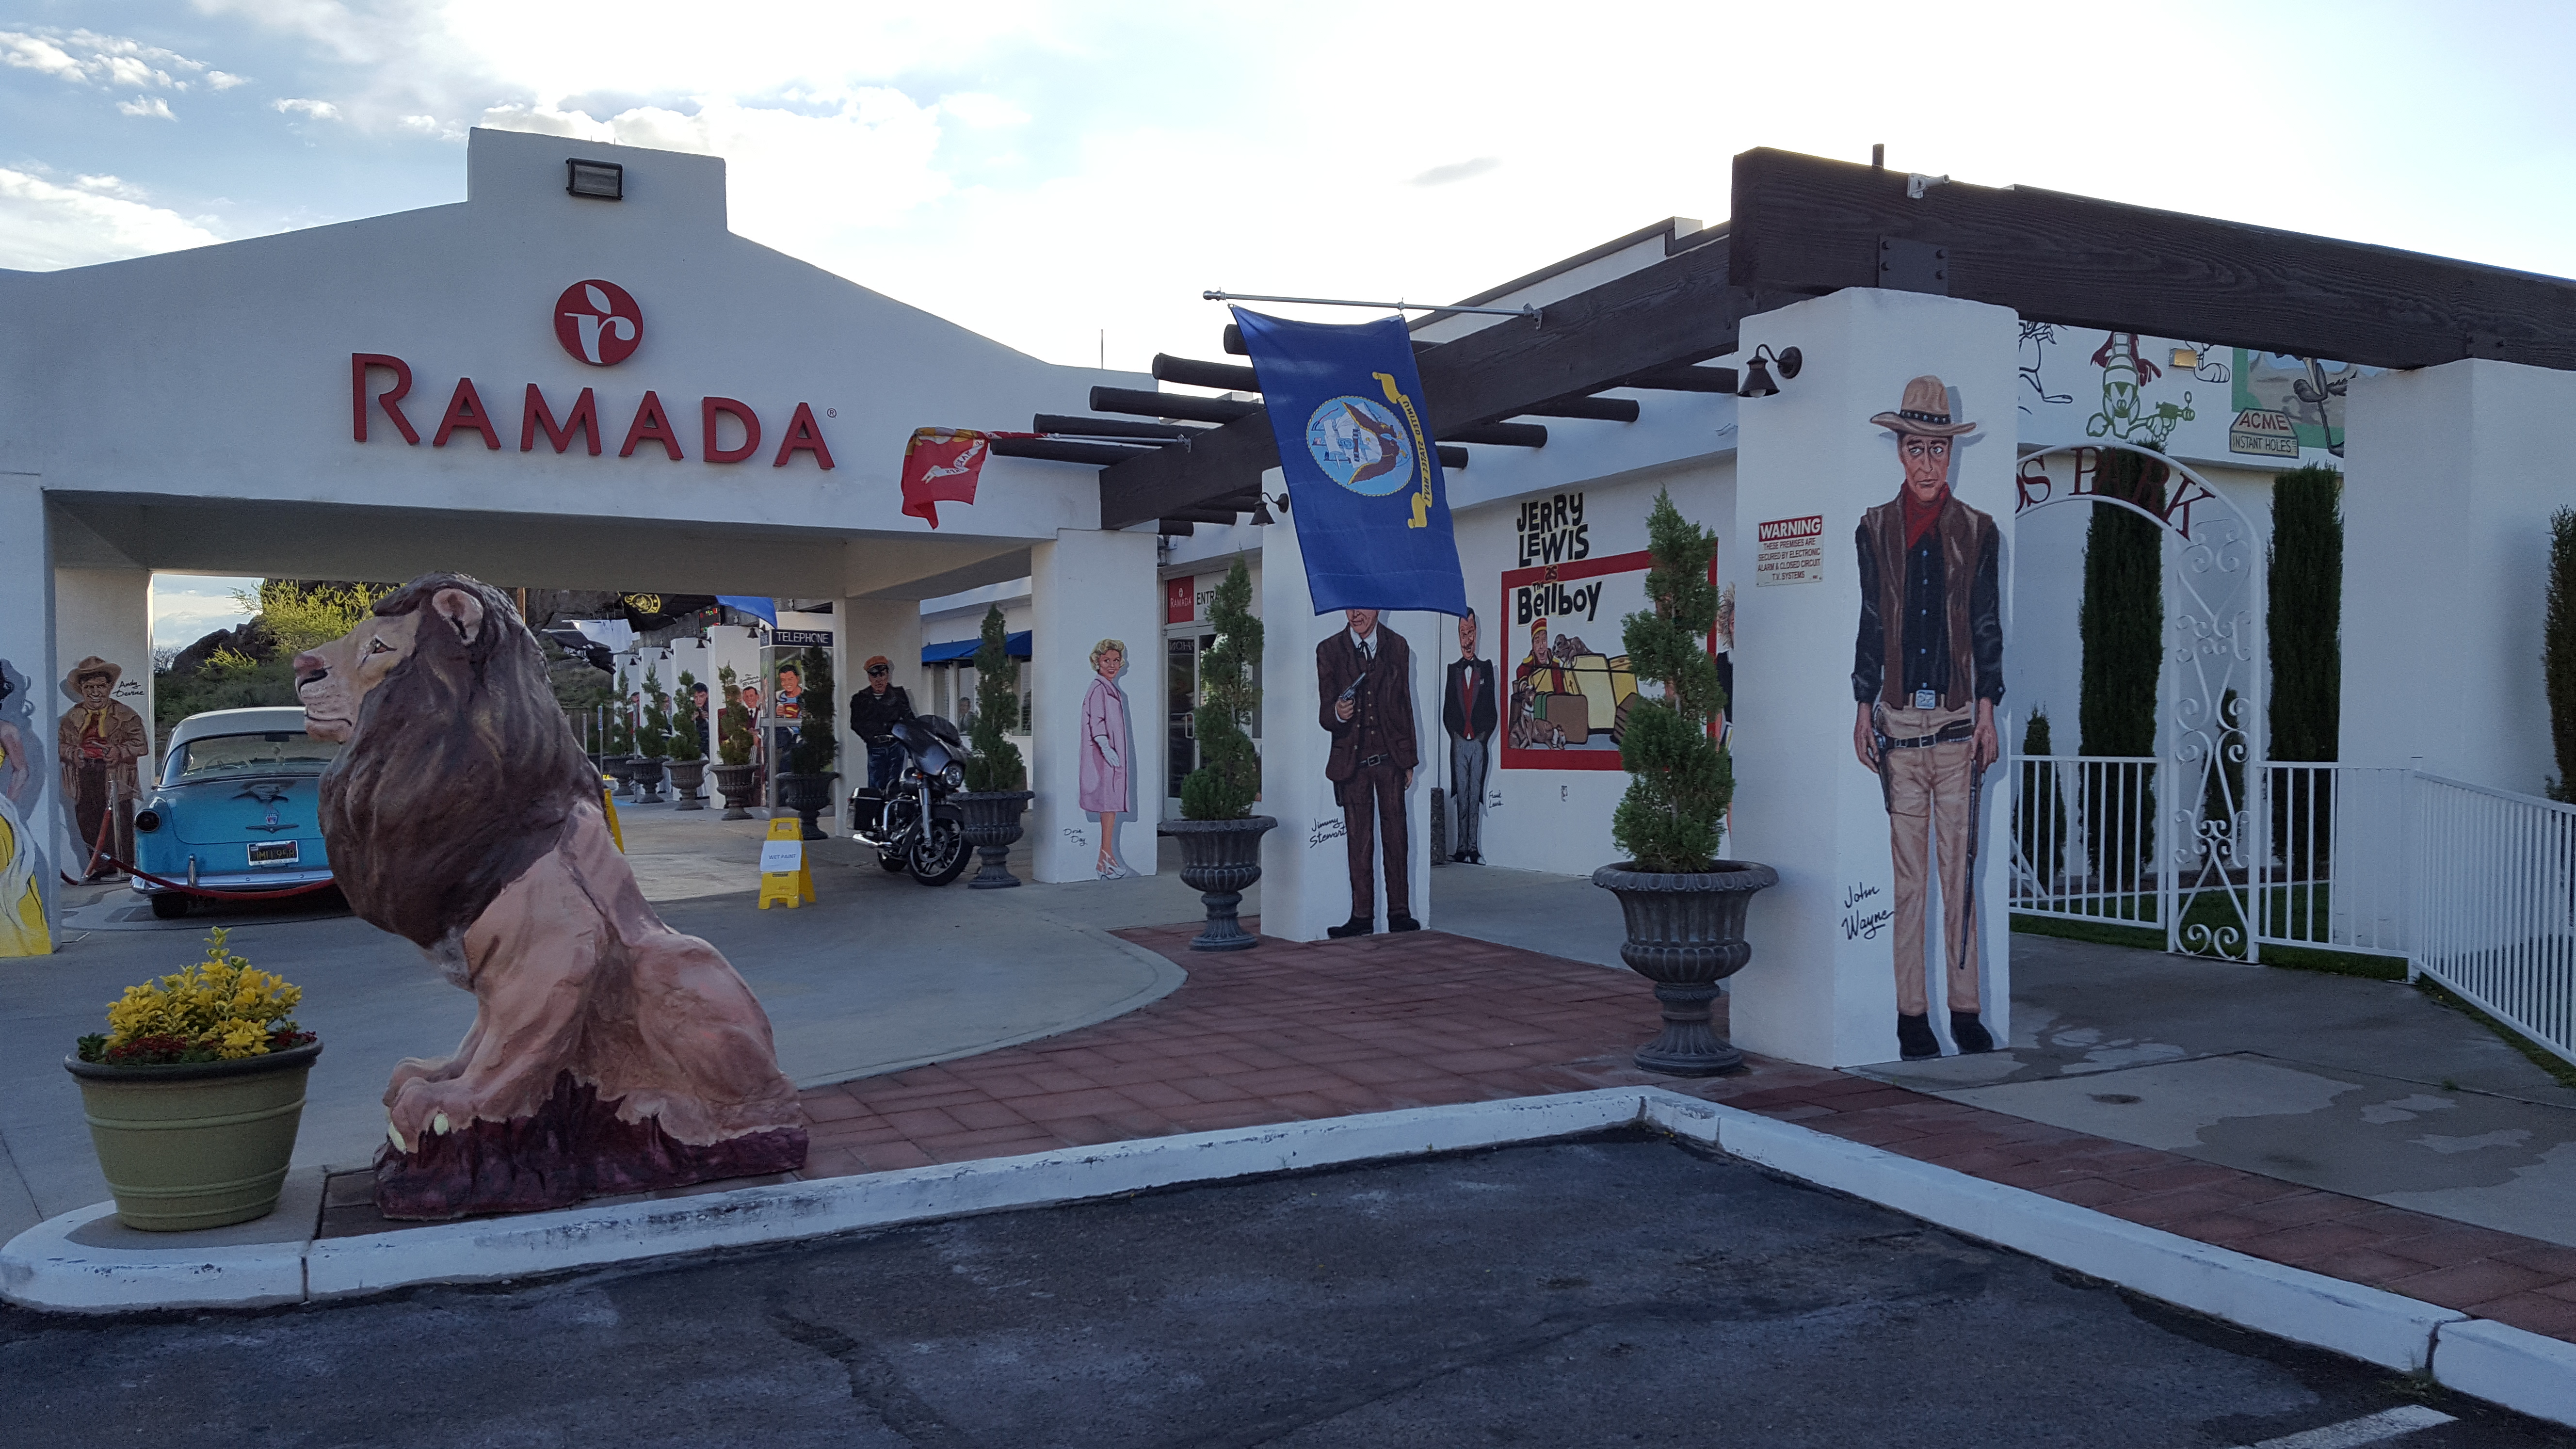 The nostalgia of Route 66 are reflected in some hotels like the Ramada in Kingman, Arizona.